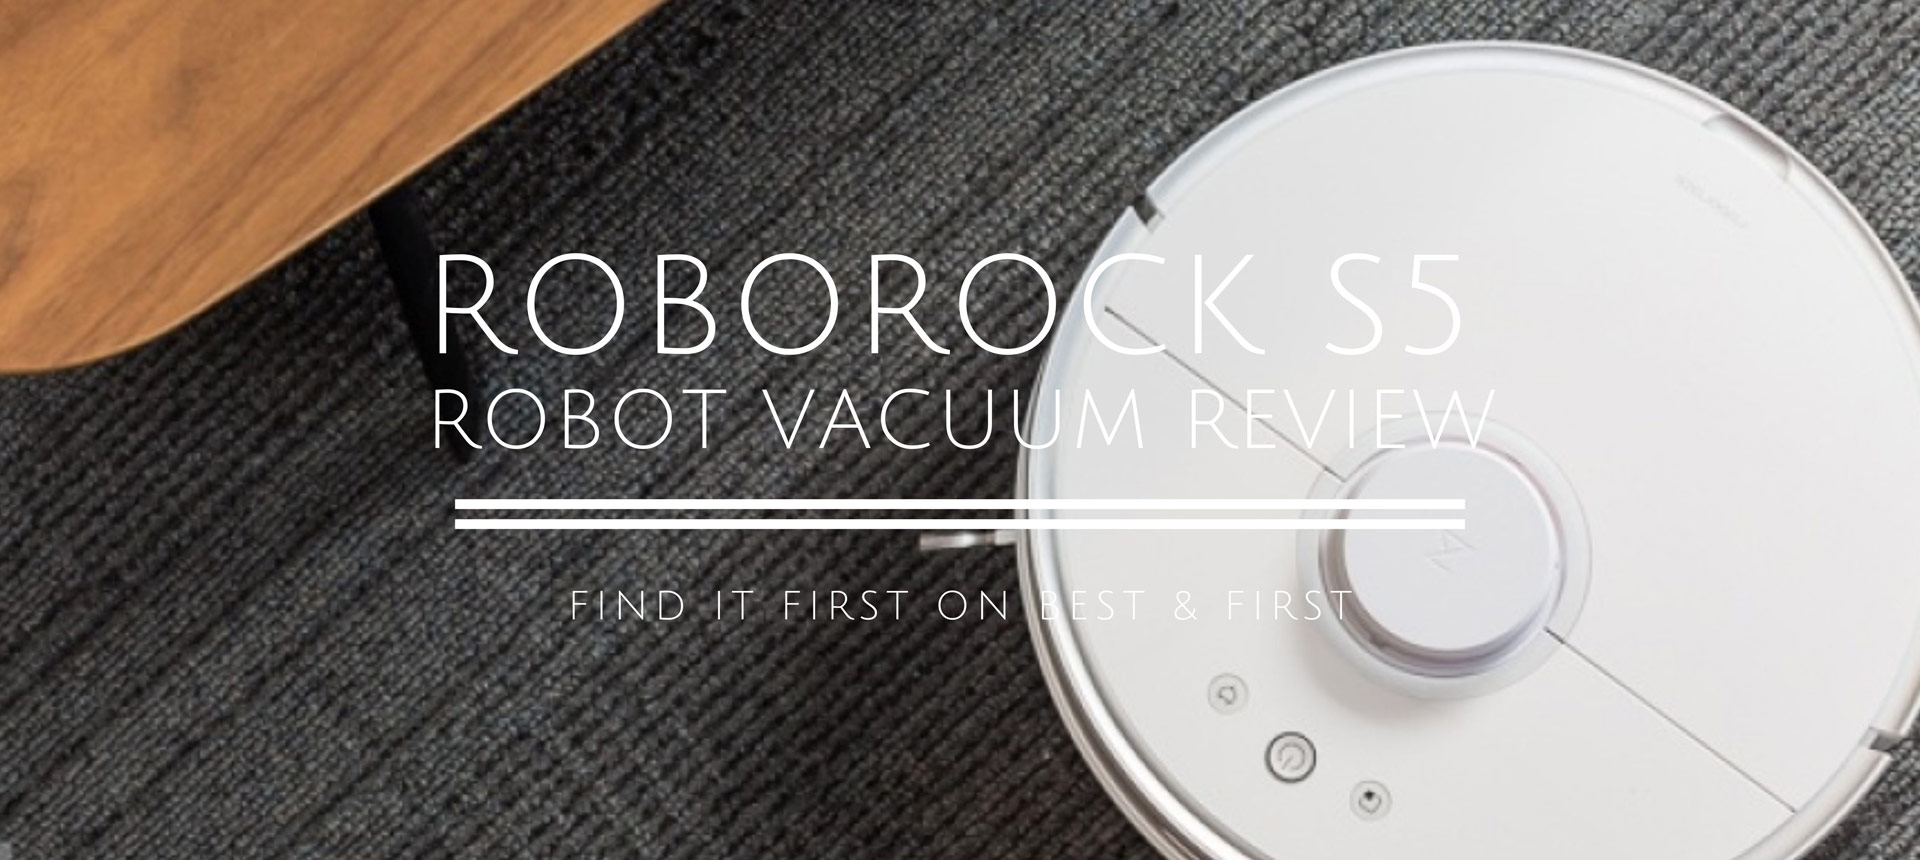 Roborock S5 Robot Vacuum and Mop Review and Buying Guide 2021